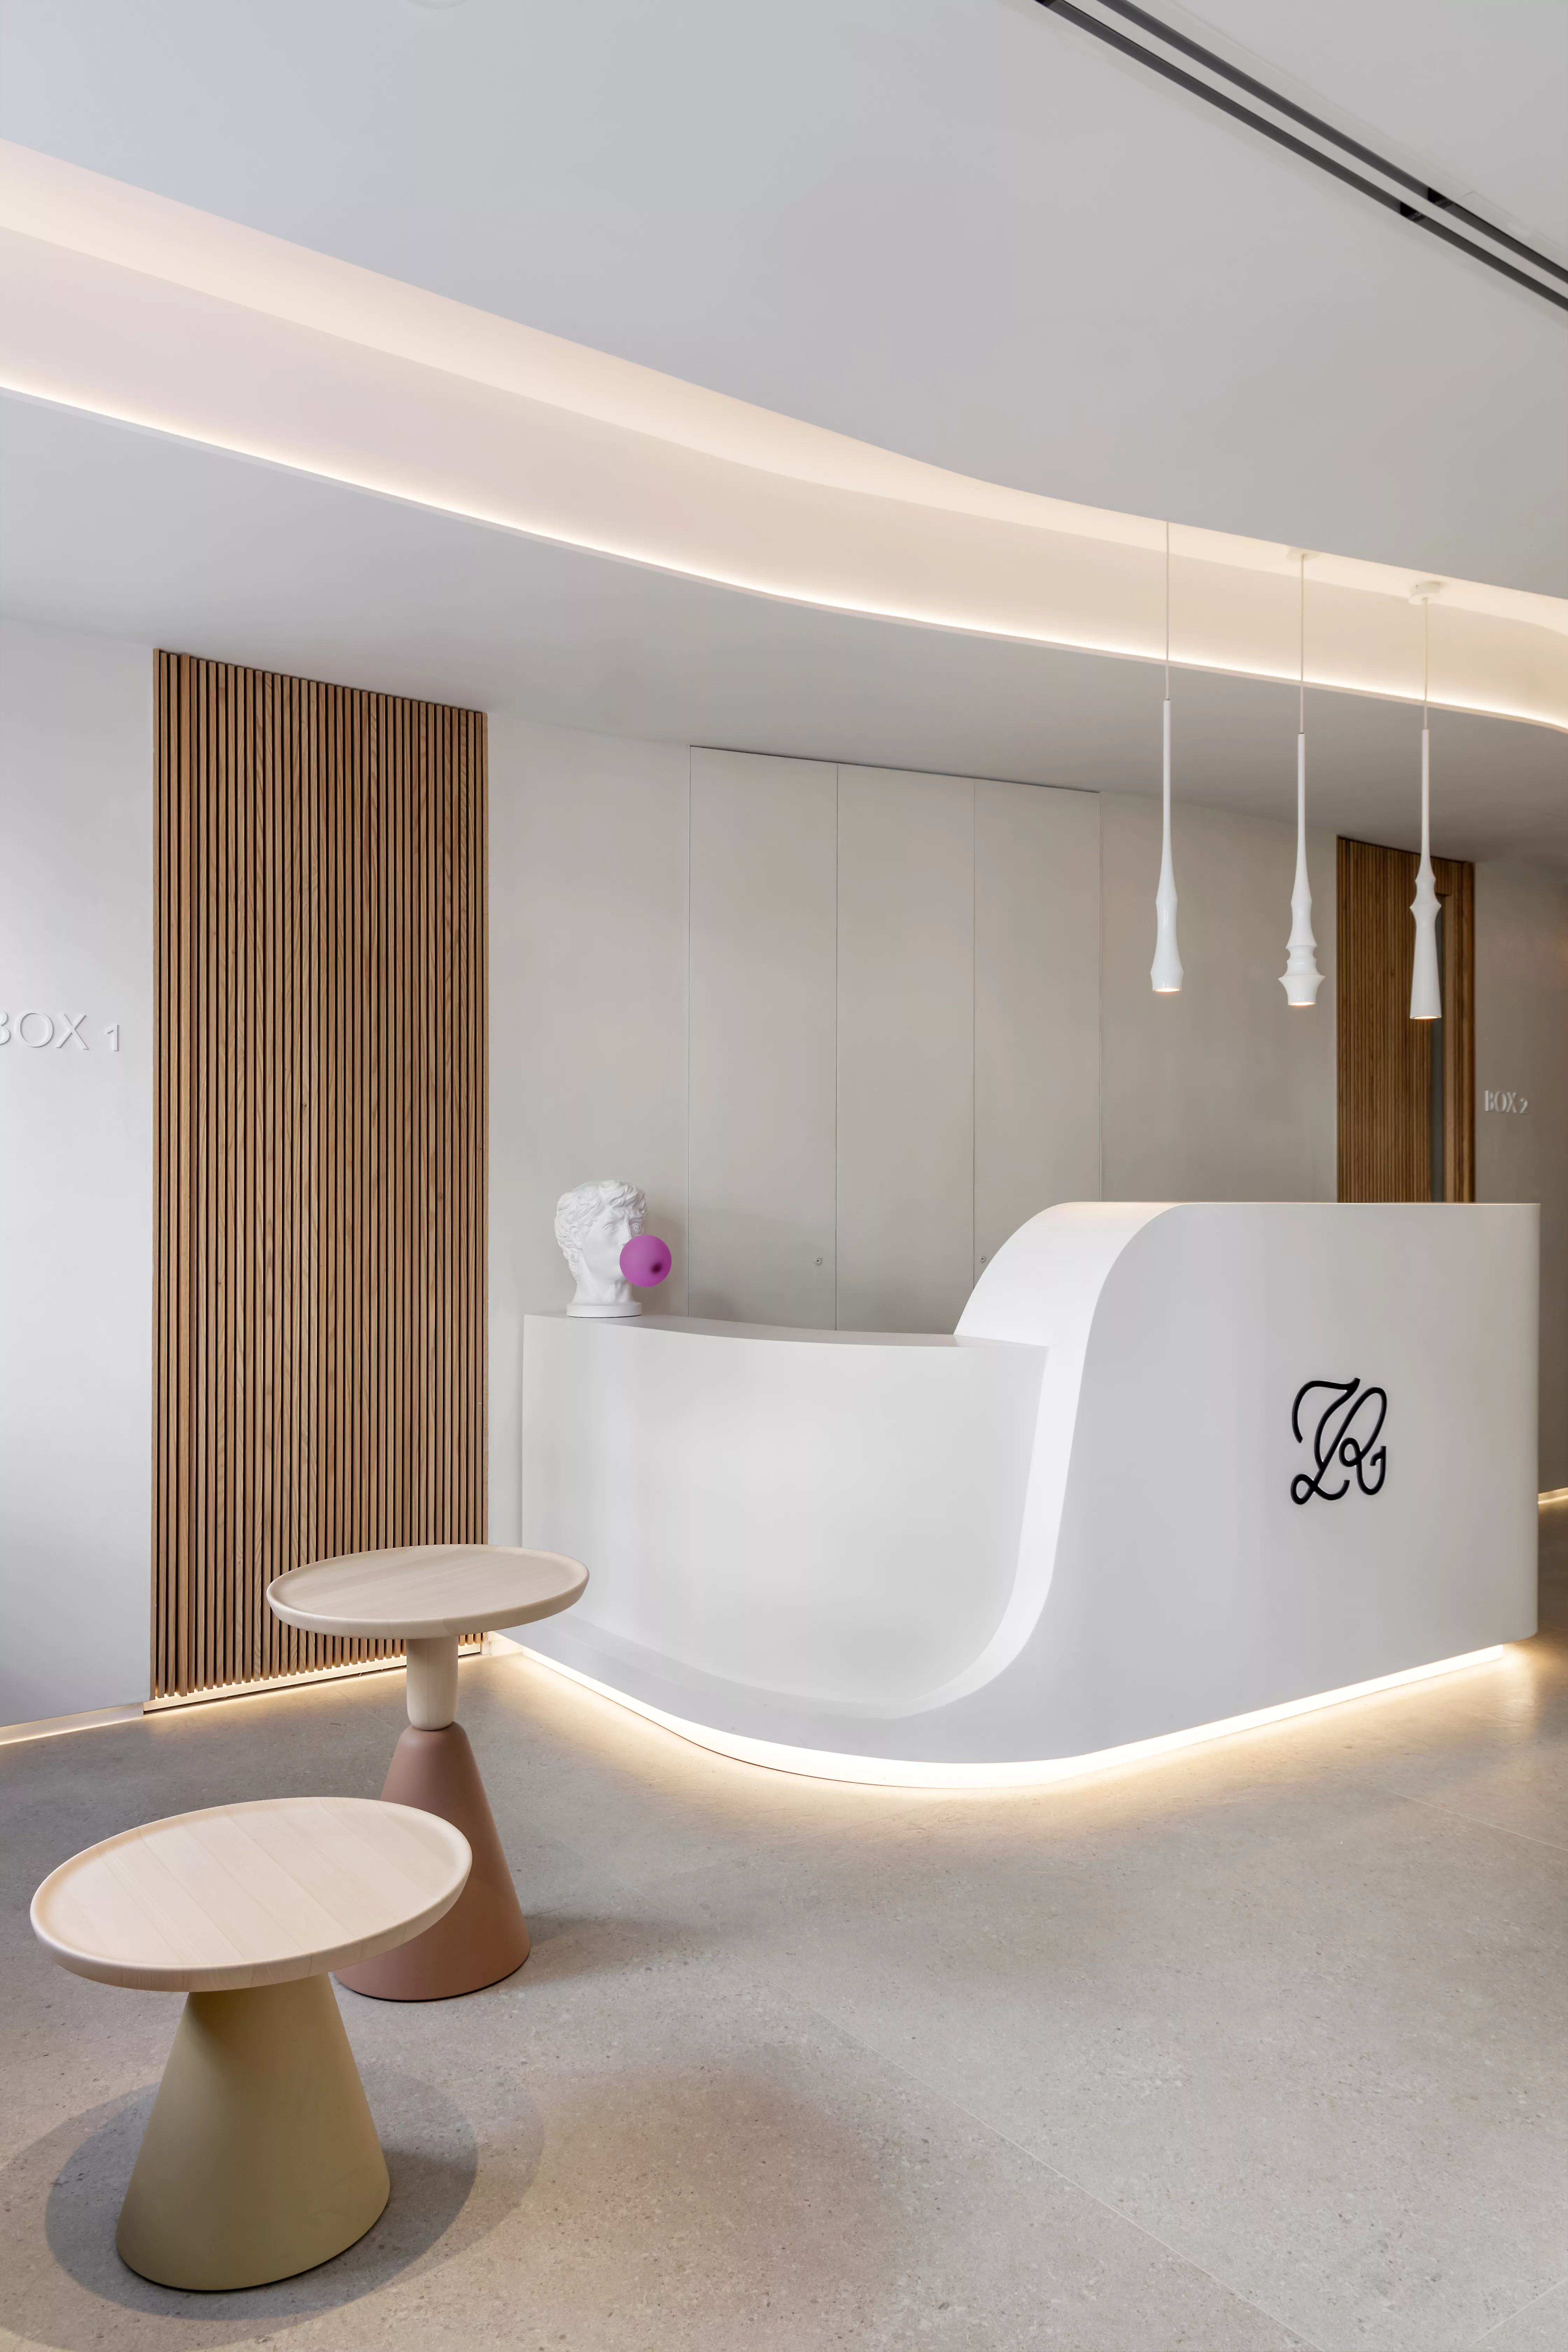 A project implemented with HIMACS for an innovative dental clinic in Madrid